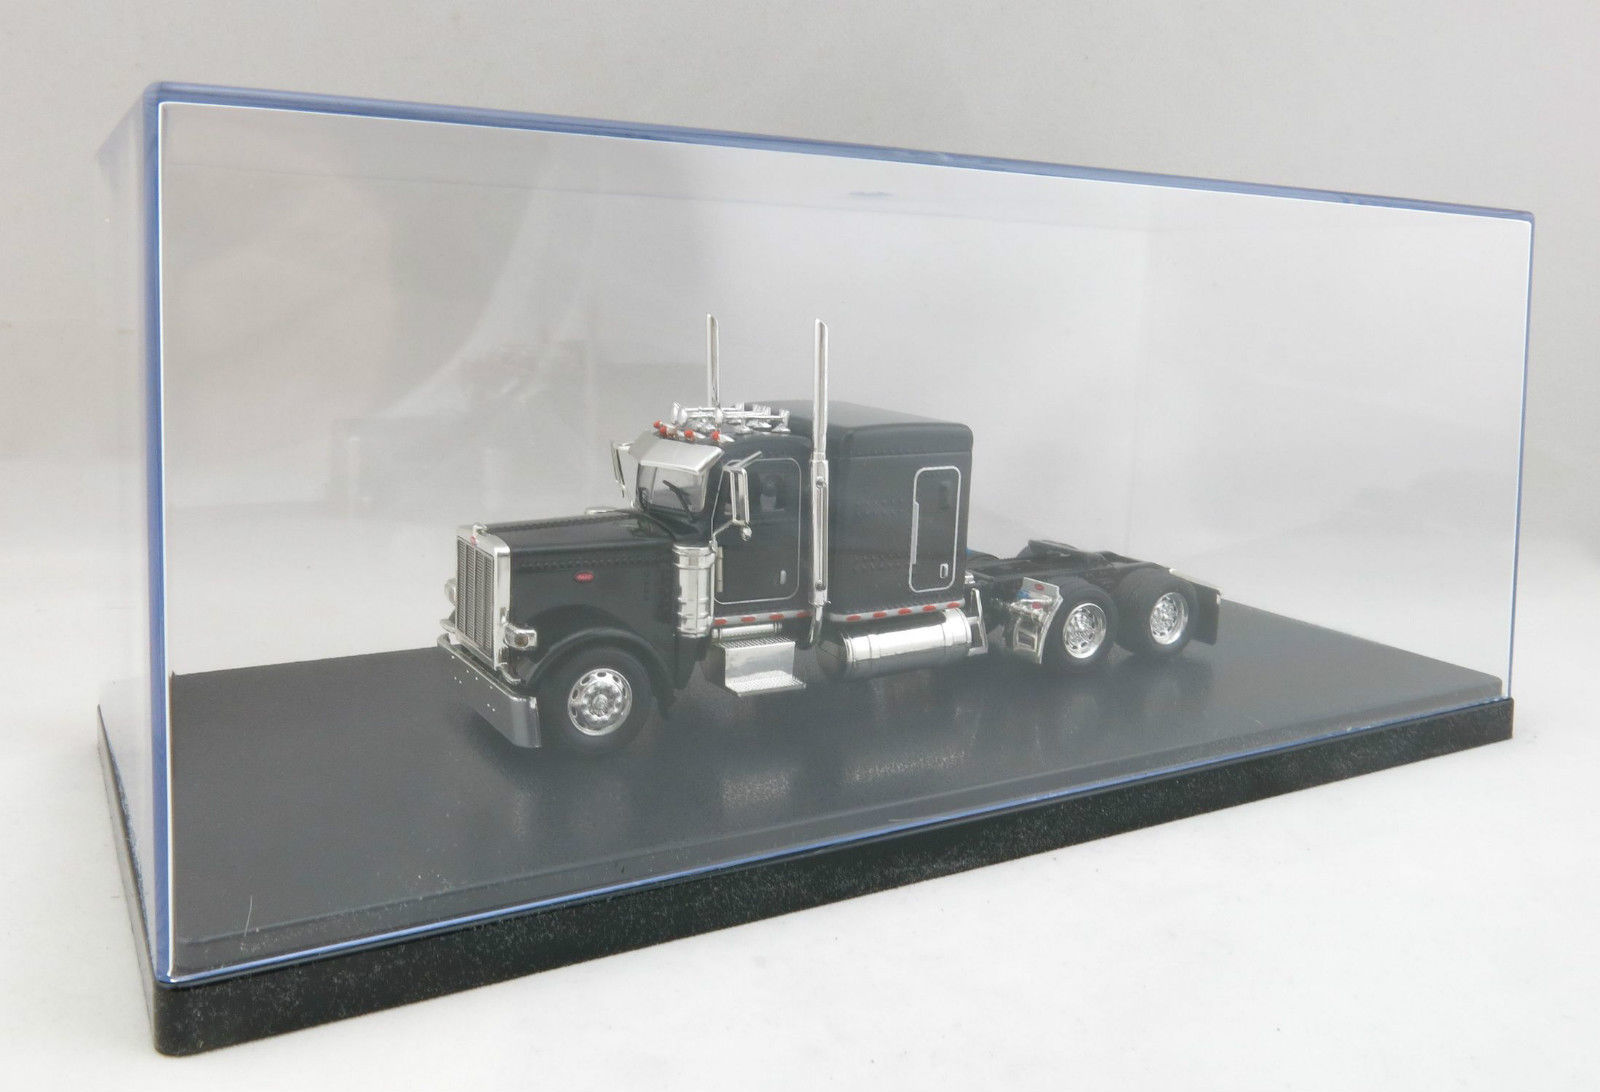 Product Image - Display Show Case Black for Diecast 1:50 Truck Prime Movers Drake Models